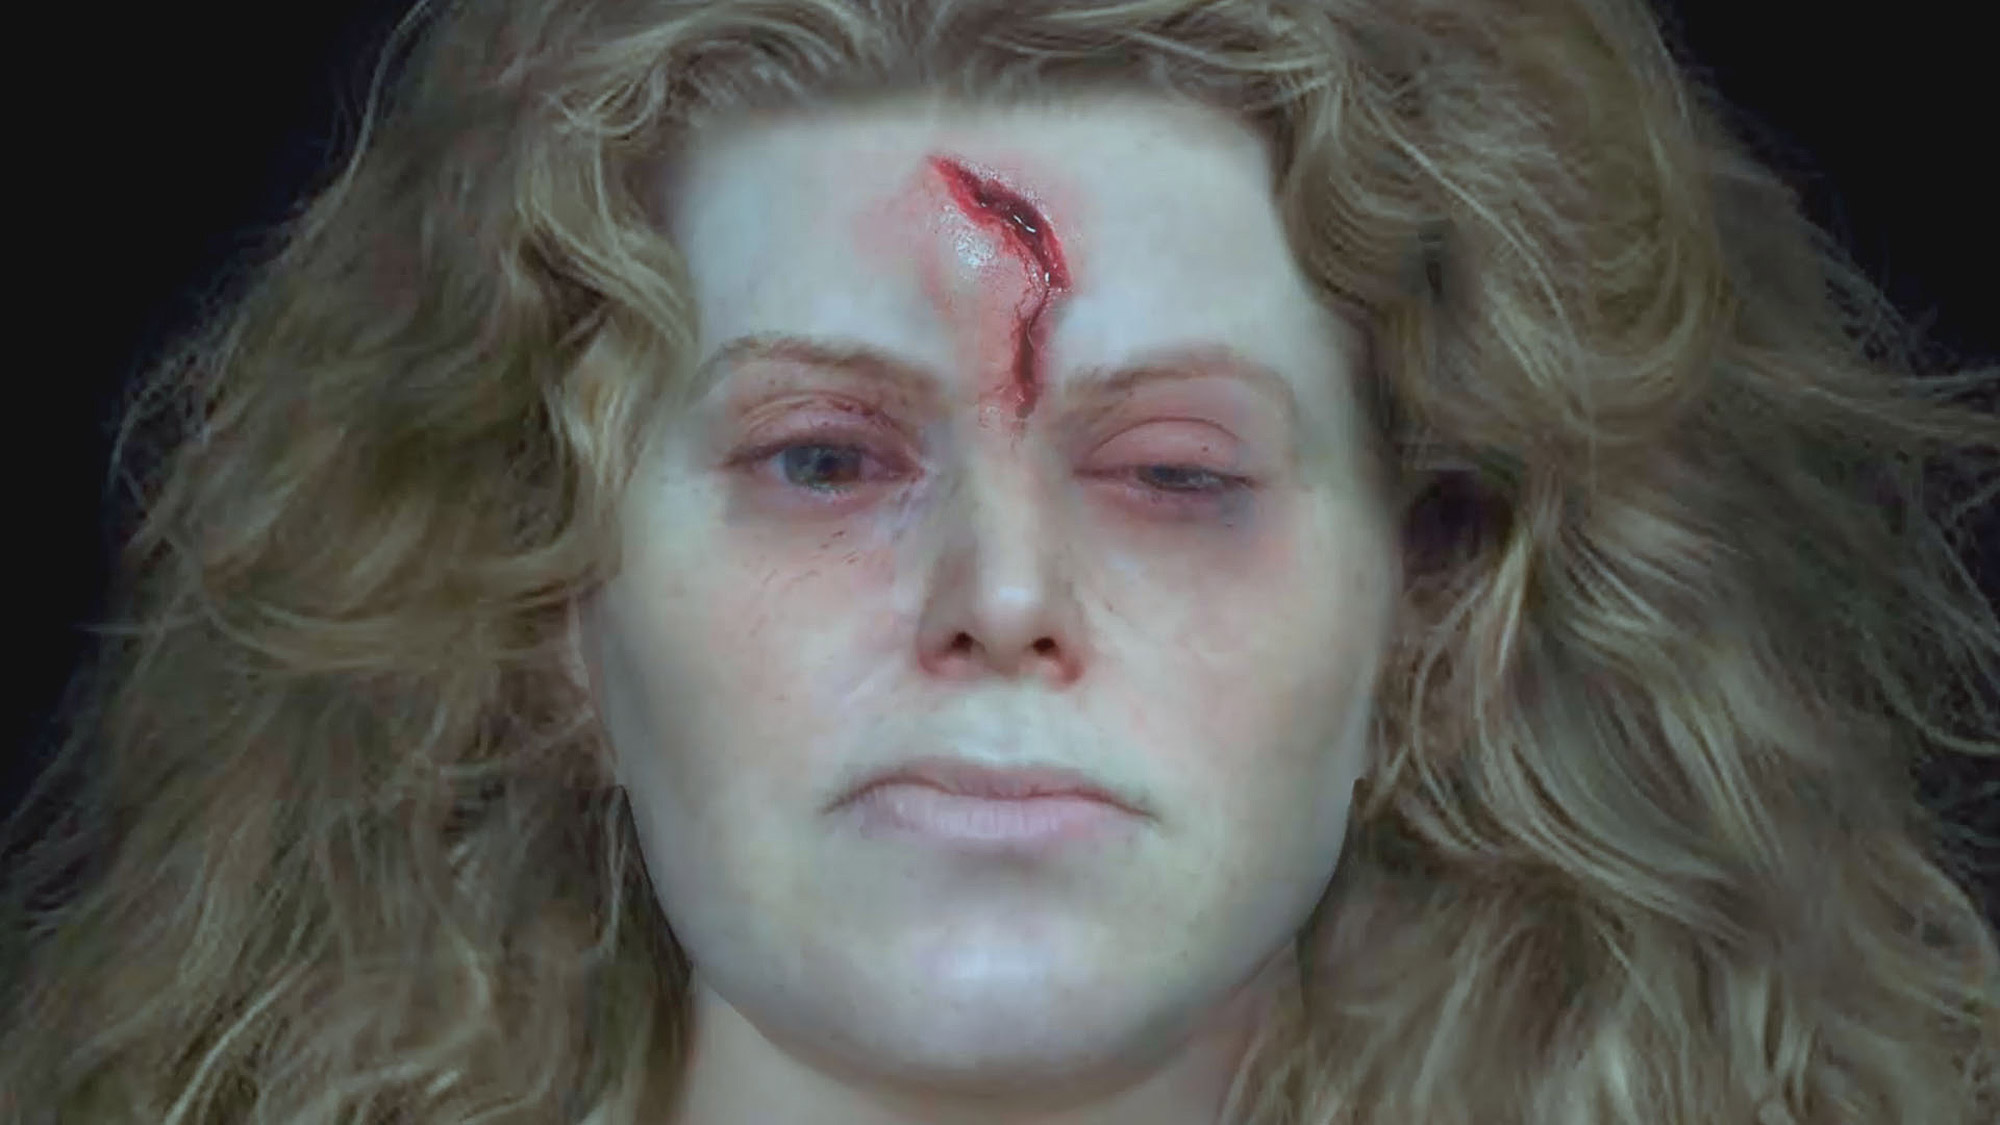 Battle-Scarred Viking Shield-Maiden Gets Facial Reconstruction for ...